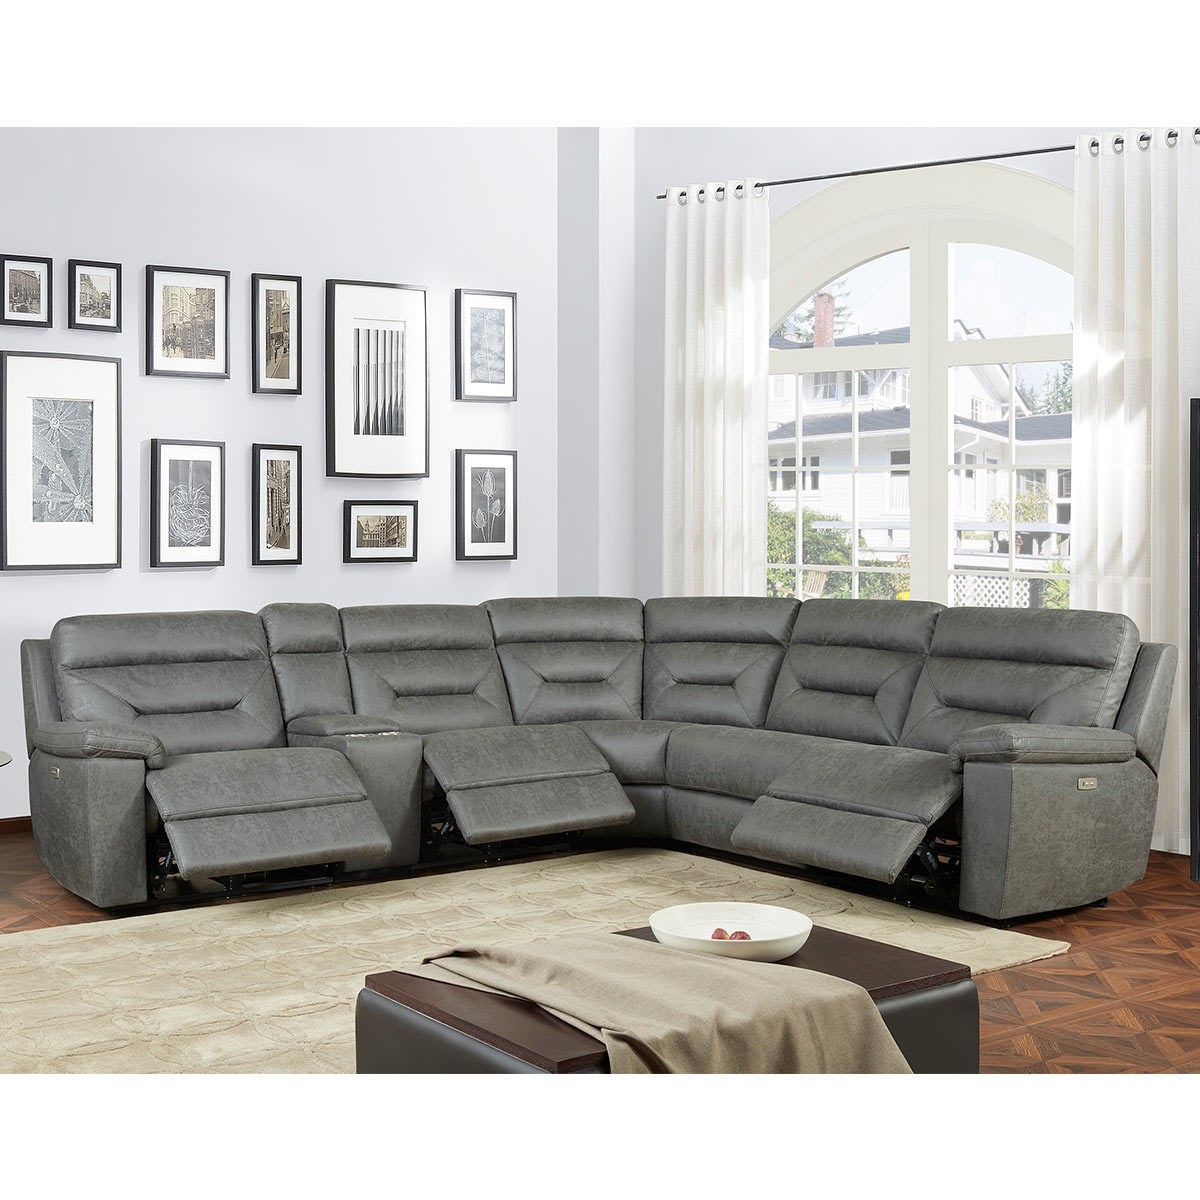 Gilman Creek Justin Grey Fabric Power, Costco Sectional Sofa With Recliner